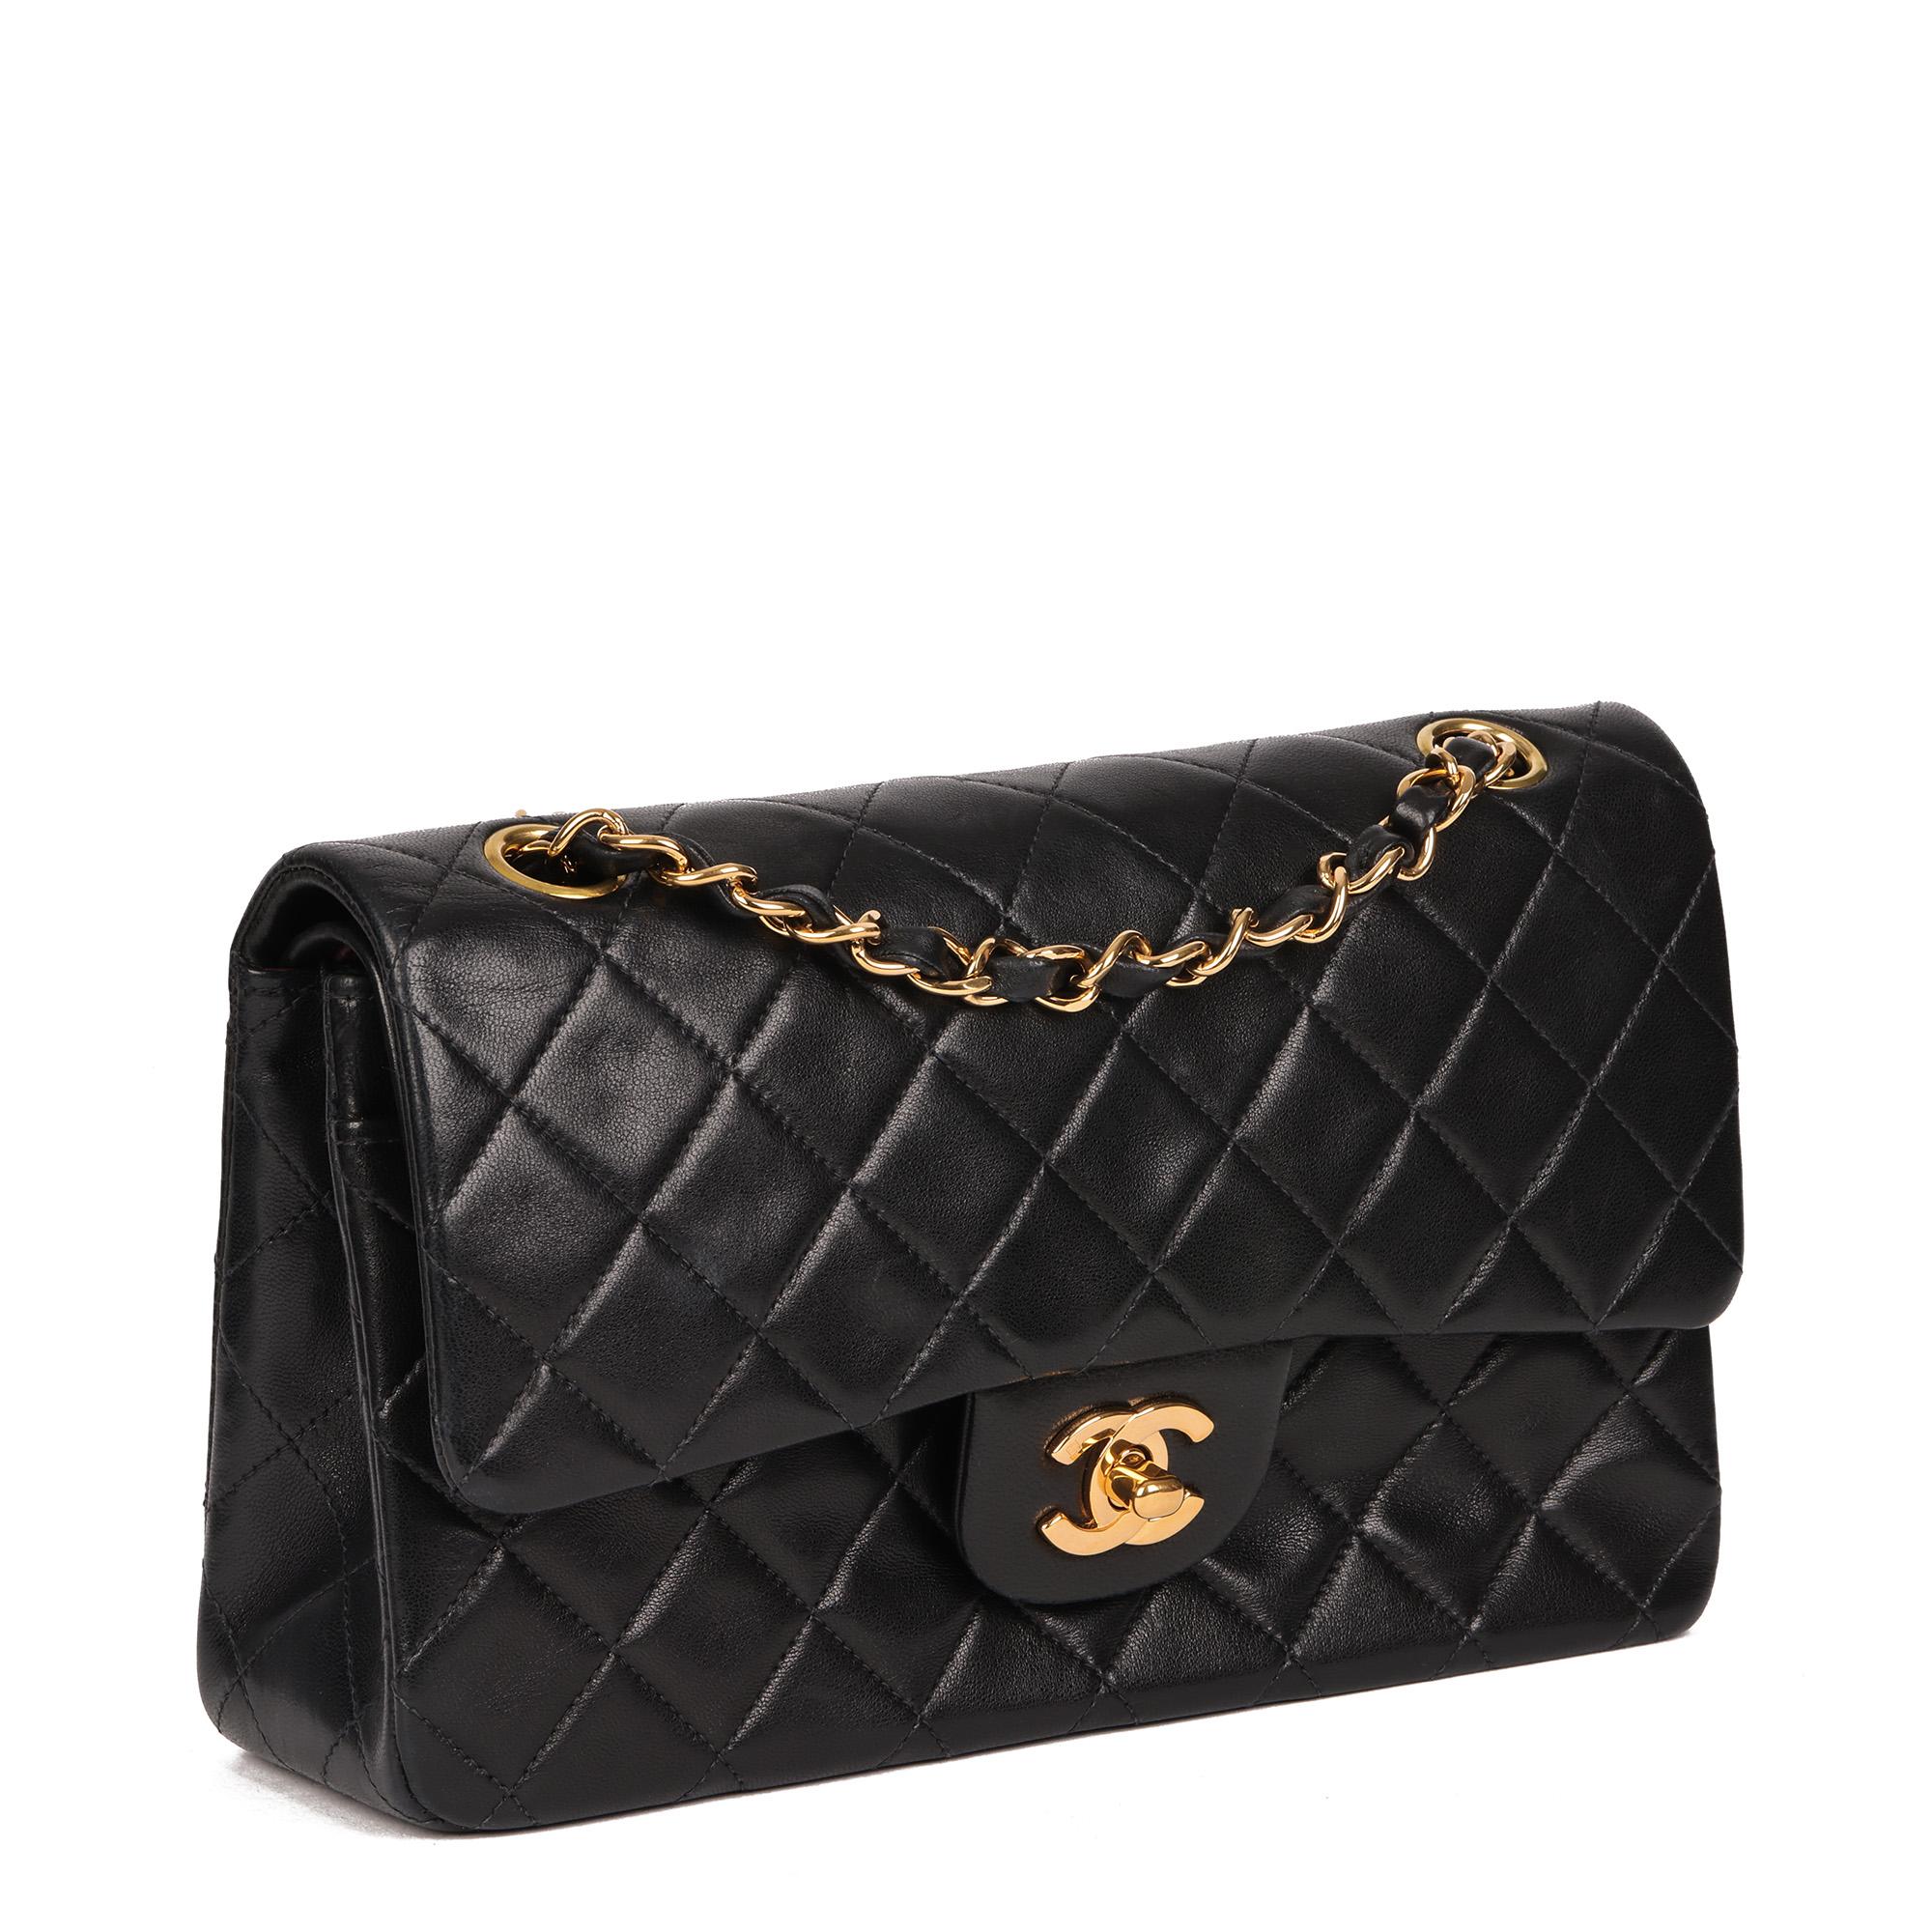 Chanel BLACK QUILTED LAMBSKIN VINTAGE SMALL CLASSIC DOUBLE FLAP BAG

CONDITION NOTES
The exterior is in excellent condition with light signs of use.
The interior is in excellent condition with light signs of use.
The hardware is in excellent